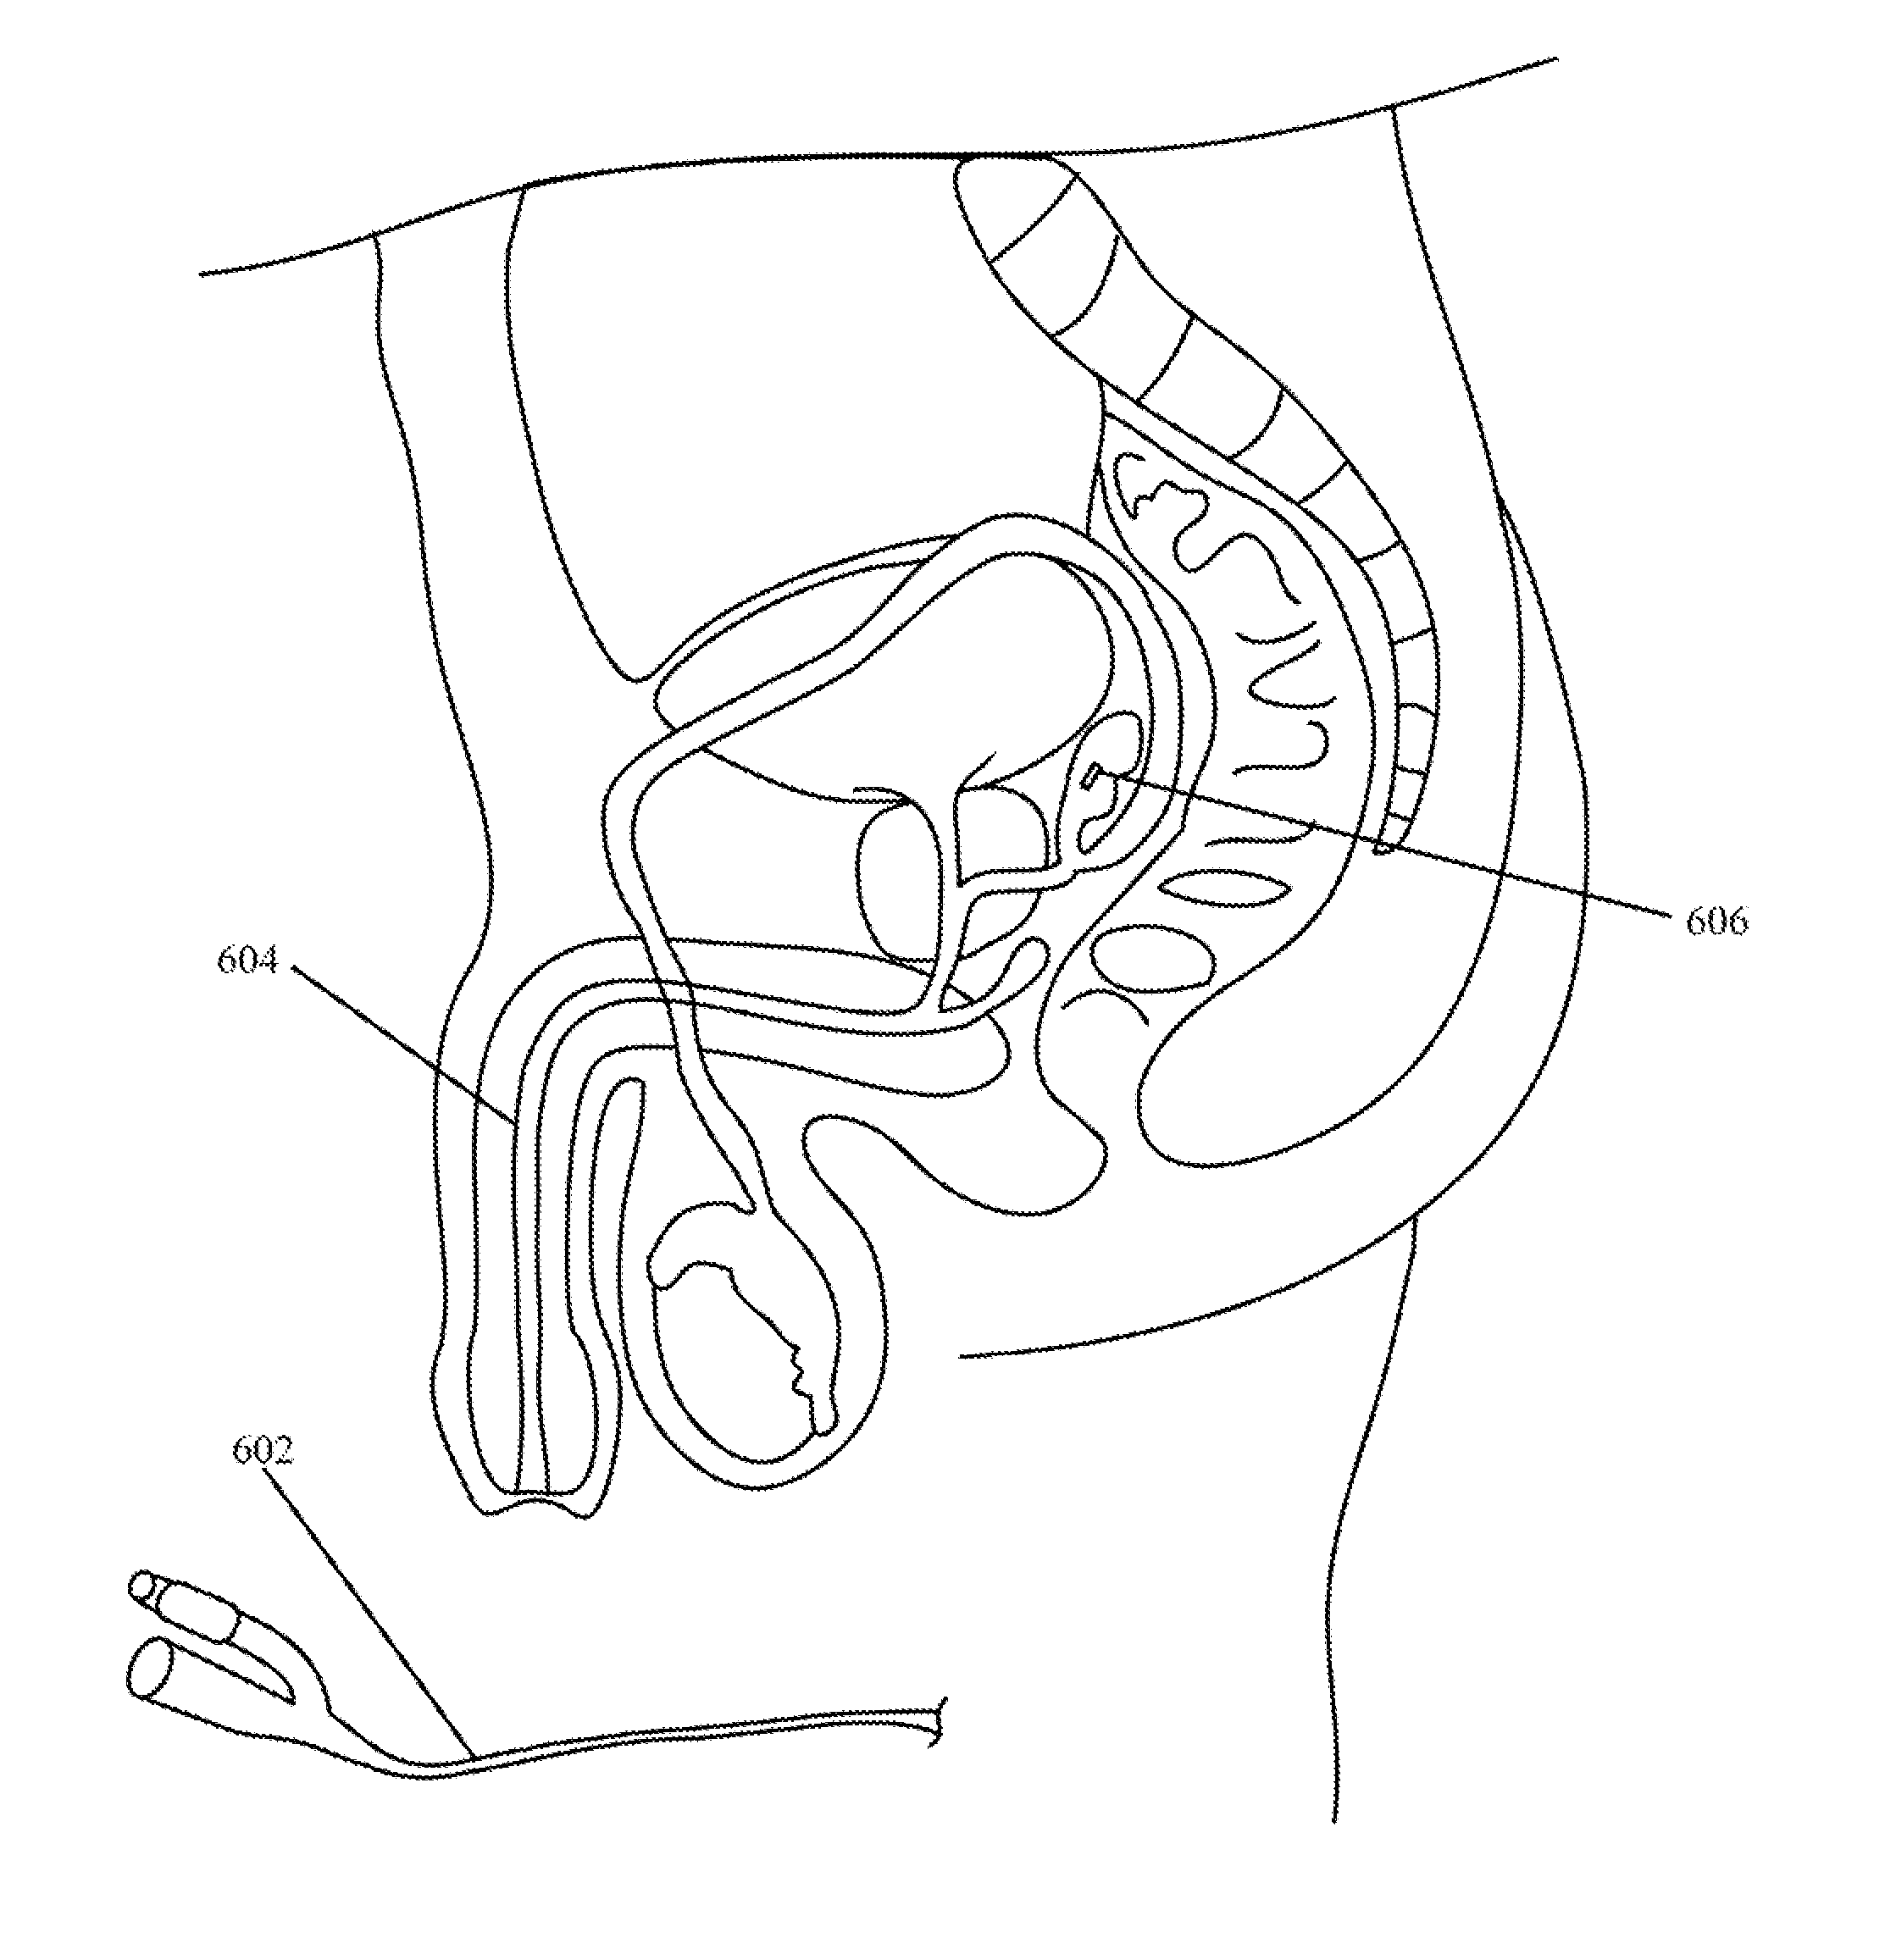 Implantable drug delivery device and methods